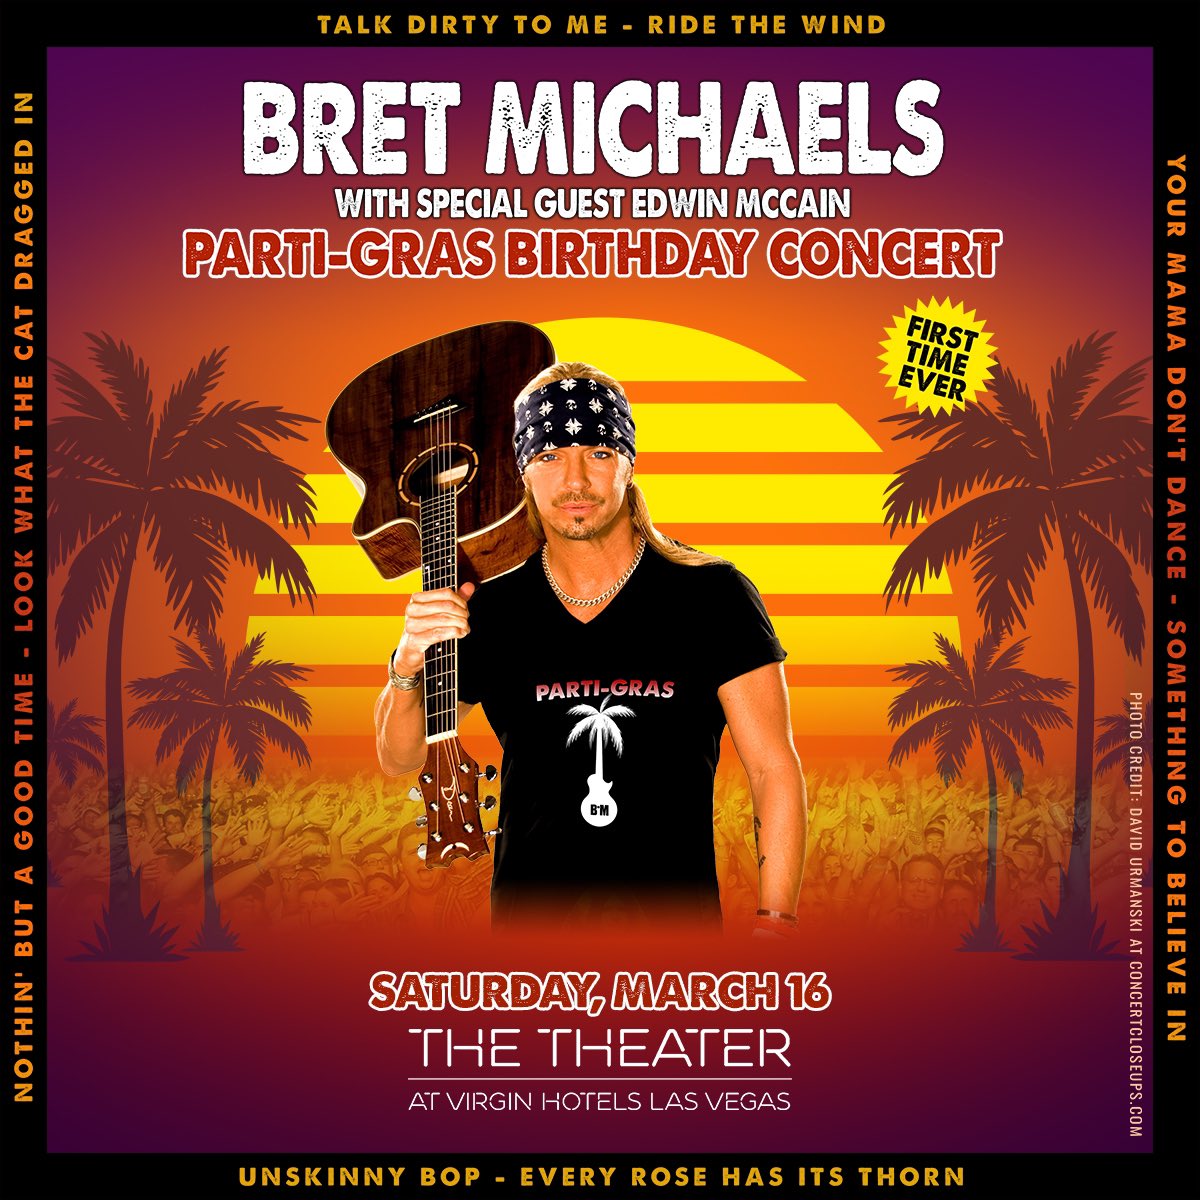 Join Bret Michaels as he brings his epic birthday party to Las Vegas 🎰🎂🎊 Bret’s Parti-Gras Birthday Concert is coming Sat 3/16/24 to @VirginHotelsLV with special guest @TheEdwinMcCain 🎸 Pre-sales start this Wednesday 12/6 🗓️ Details👇 axs.com/events/511917/…